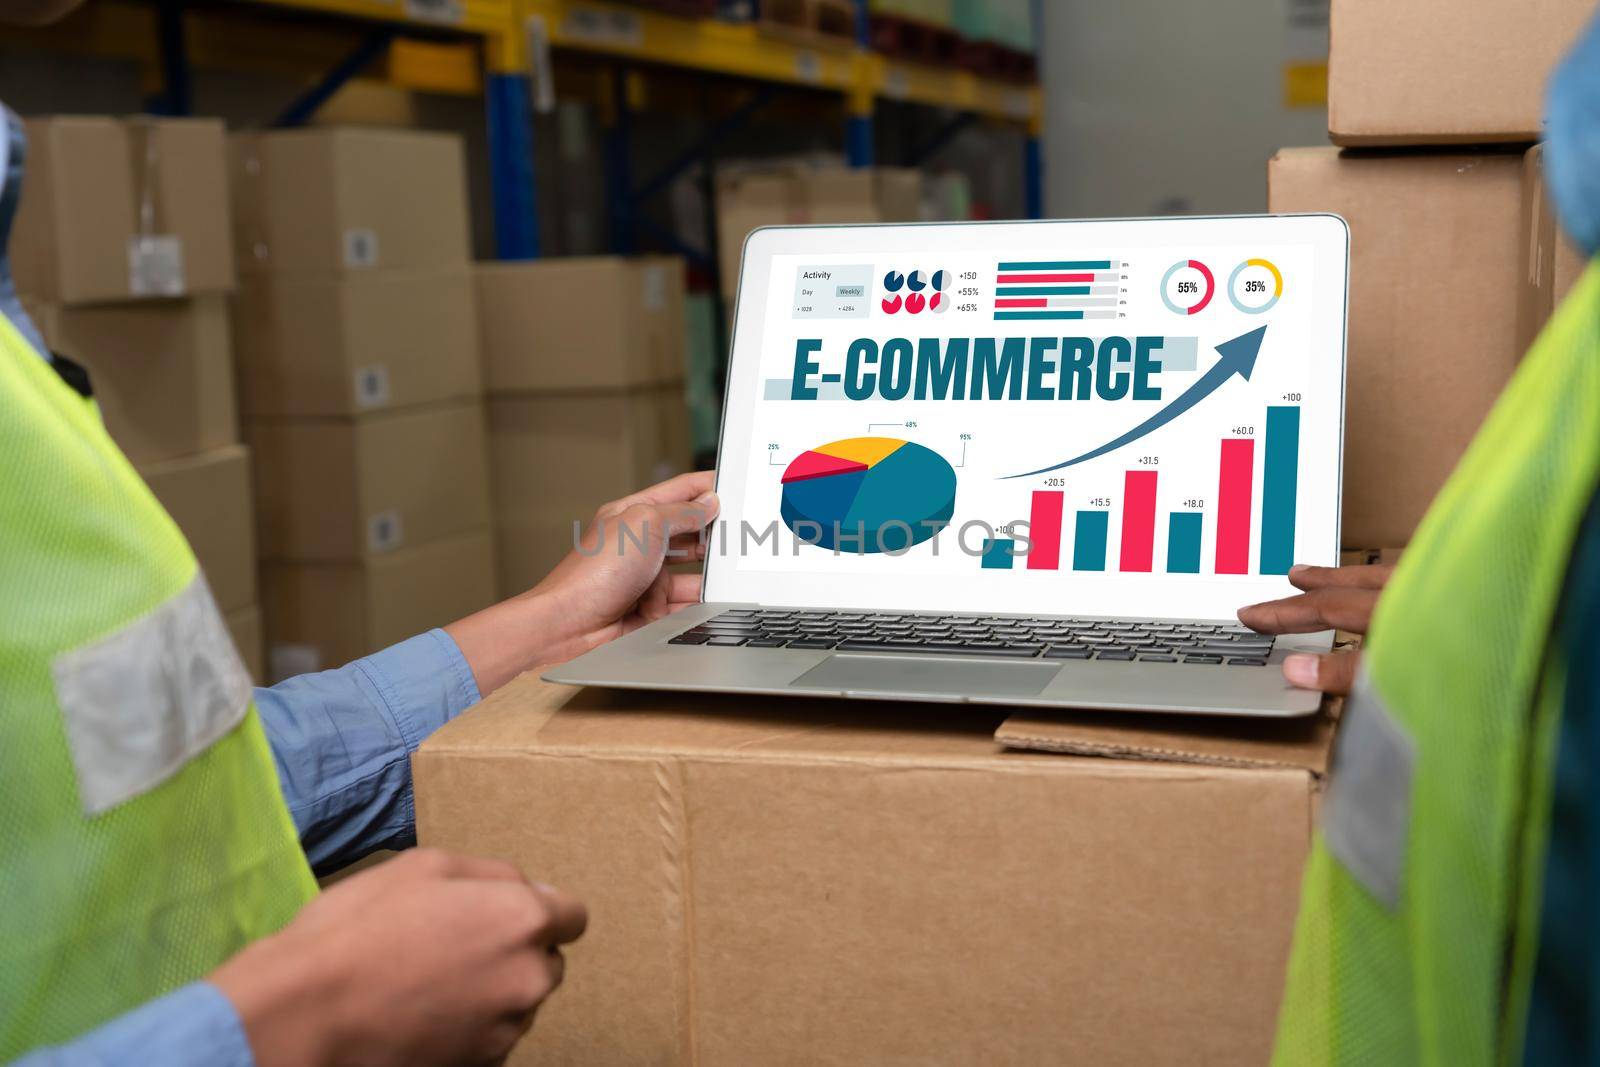 E-commerce data software provide modish dashboard for sale analysis by biancoblue